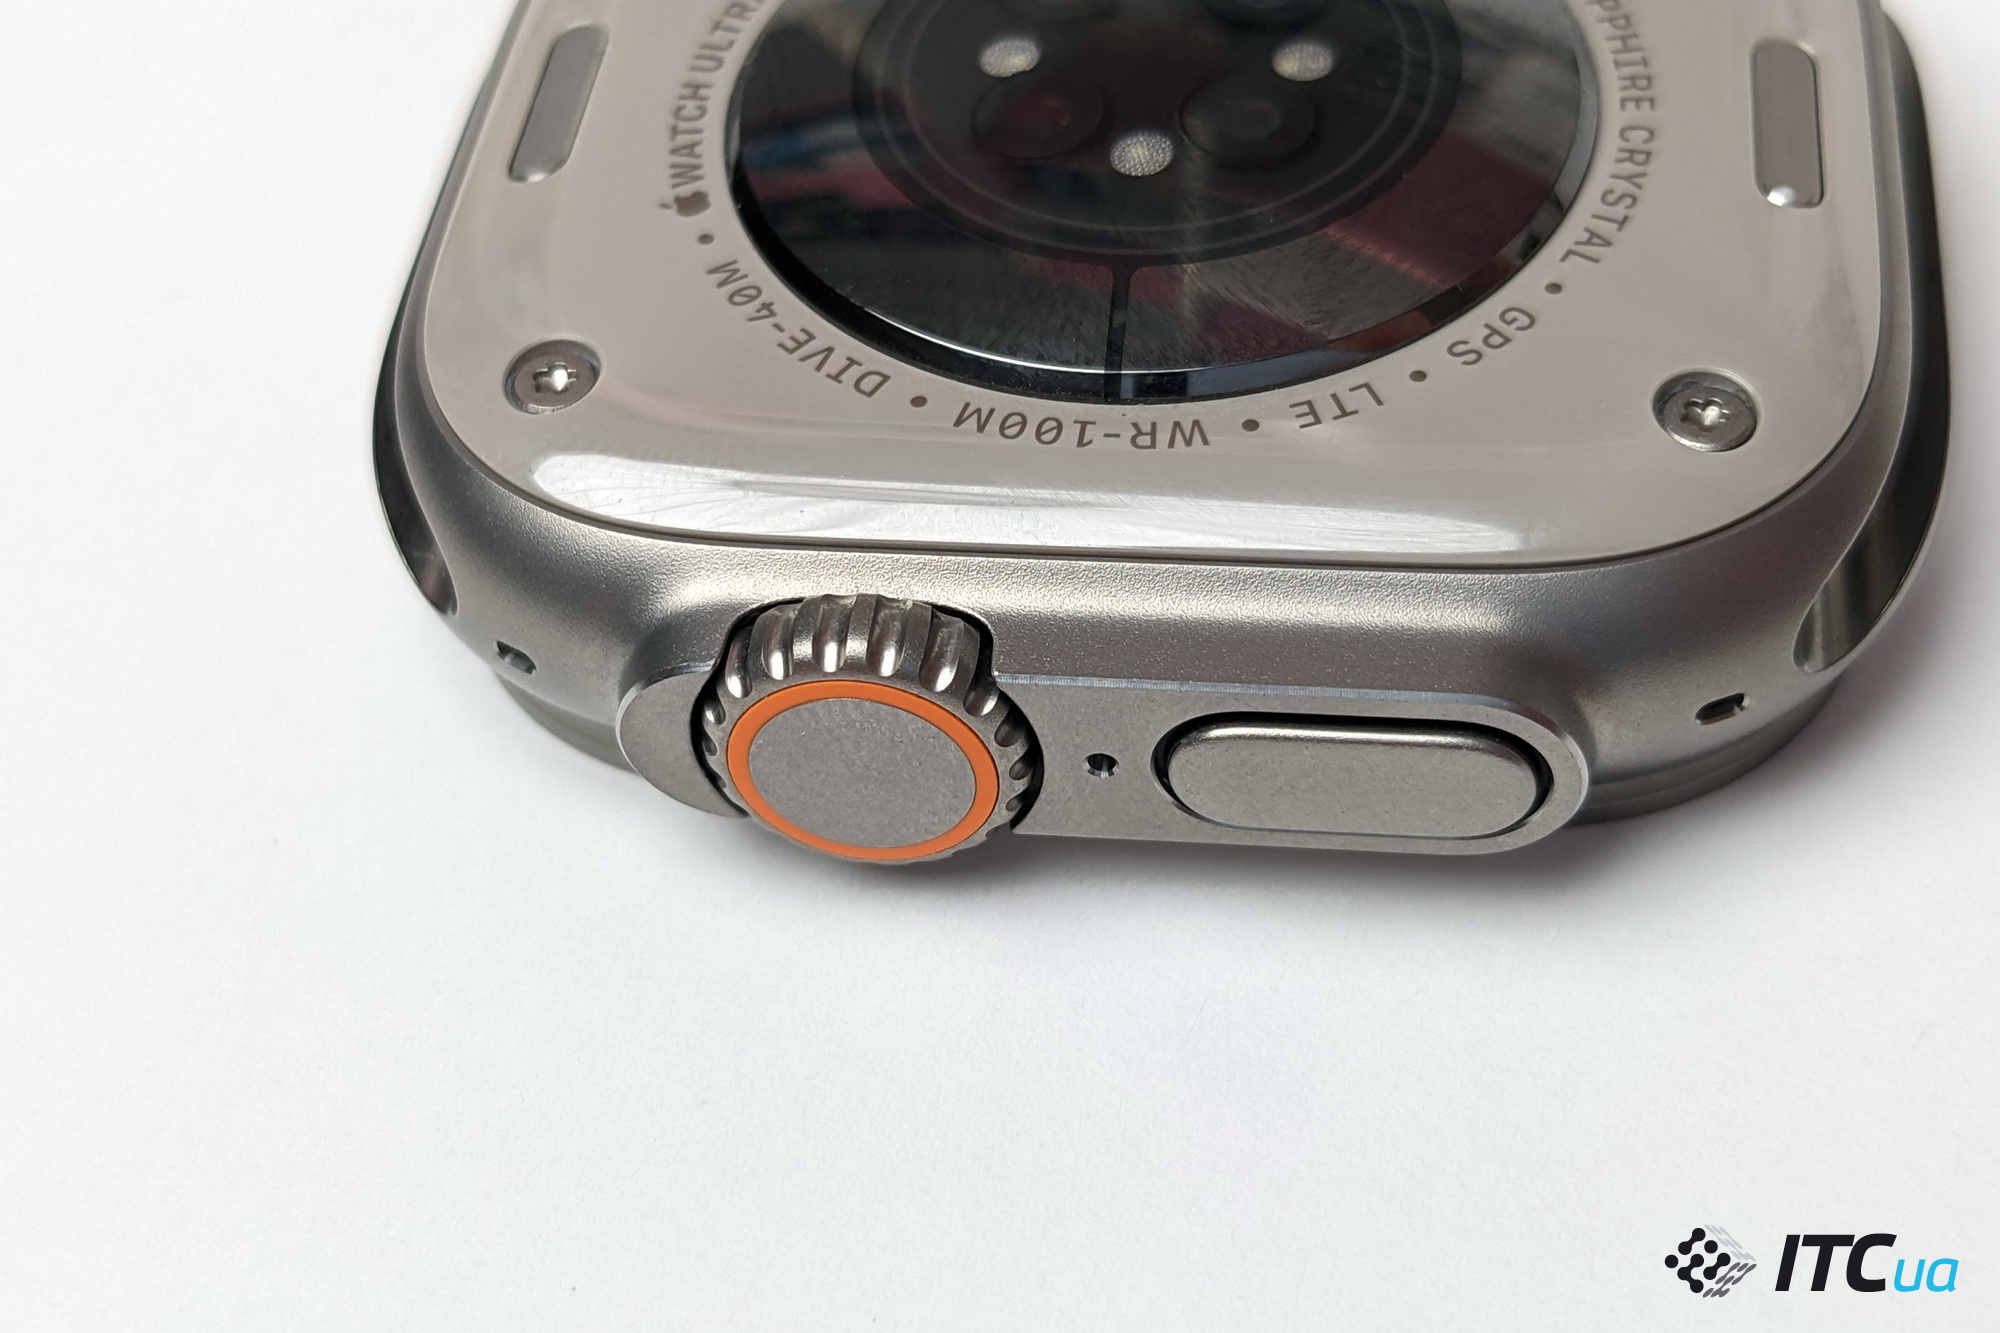 Apple Watch Ultra review: new design, enhanced functionality and indestructible case